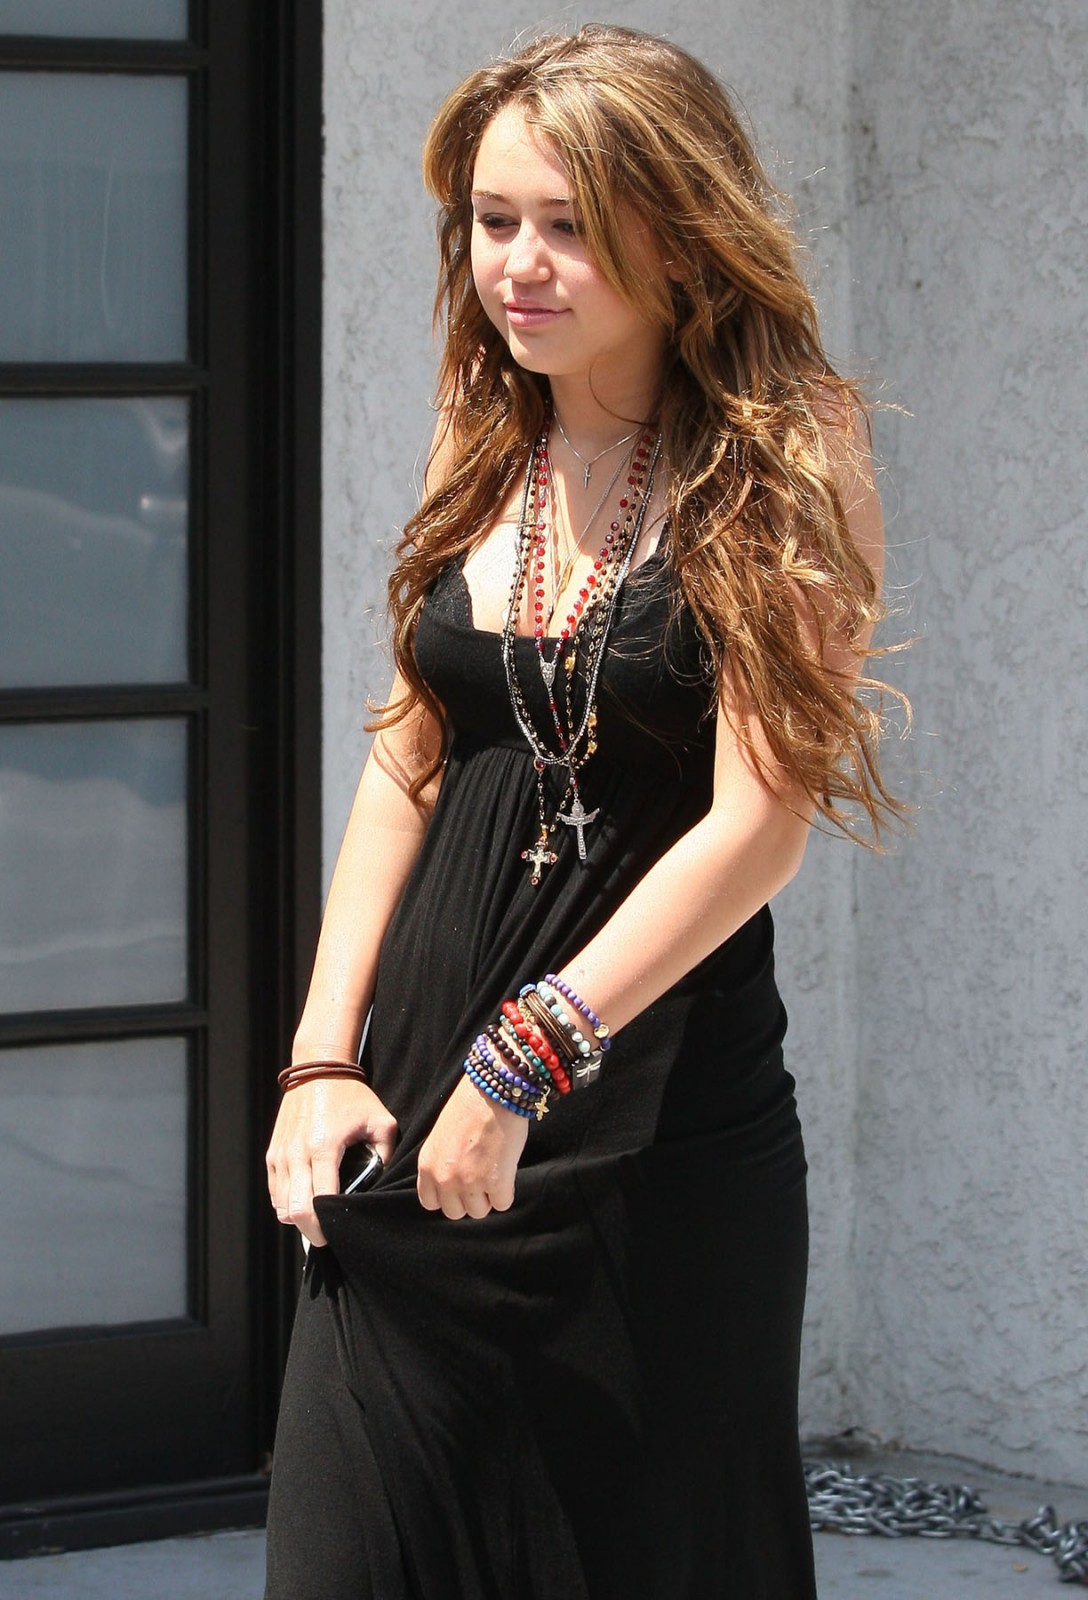 Miley-Cyrus-20090831_Out-n-About-Studio-City_May09_08562-1088x1600.jpg